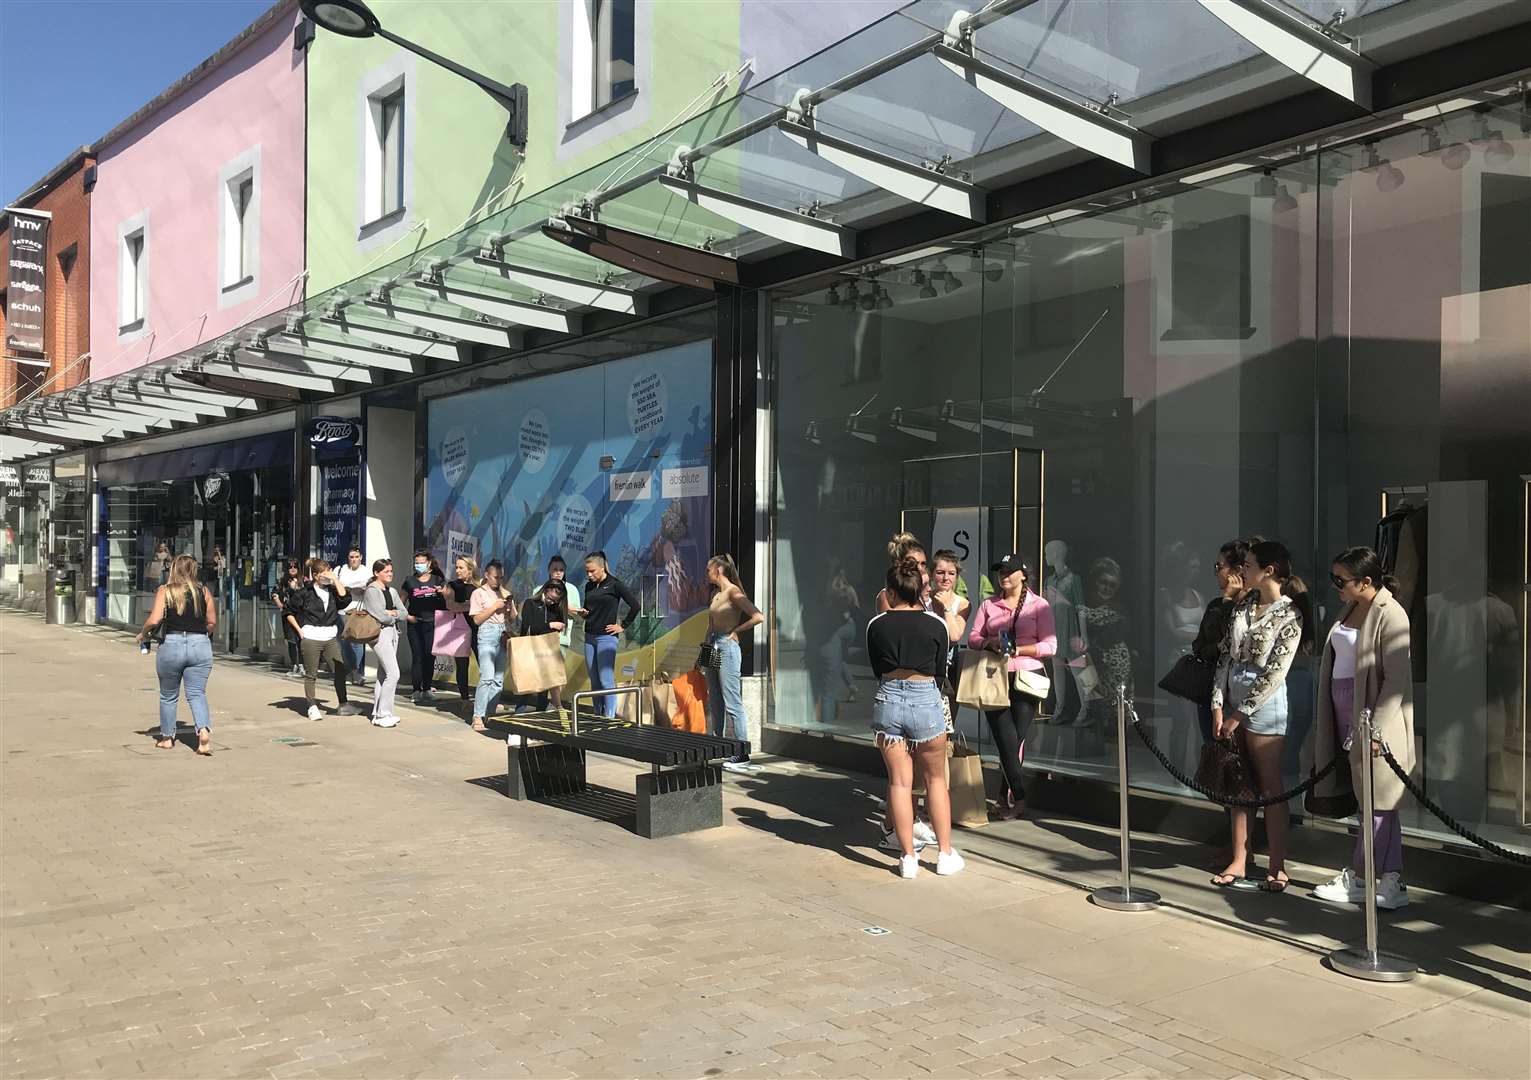 Queues for Zara clothes store in Maidstone this morning as non-essential retailers begin to reopen